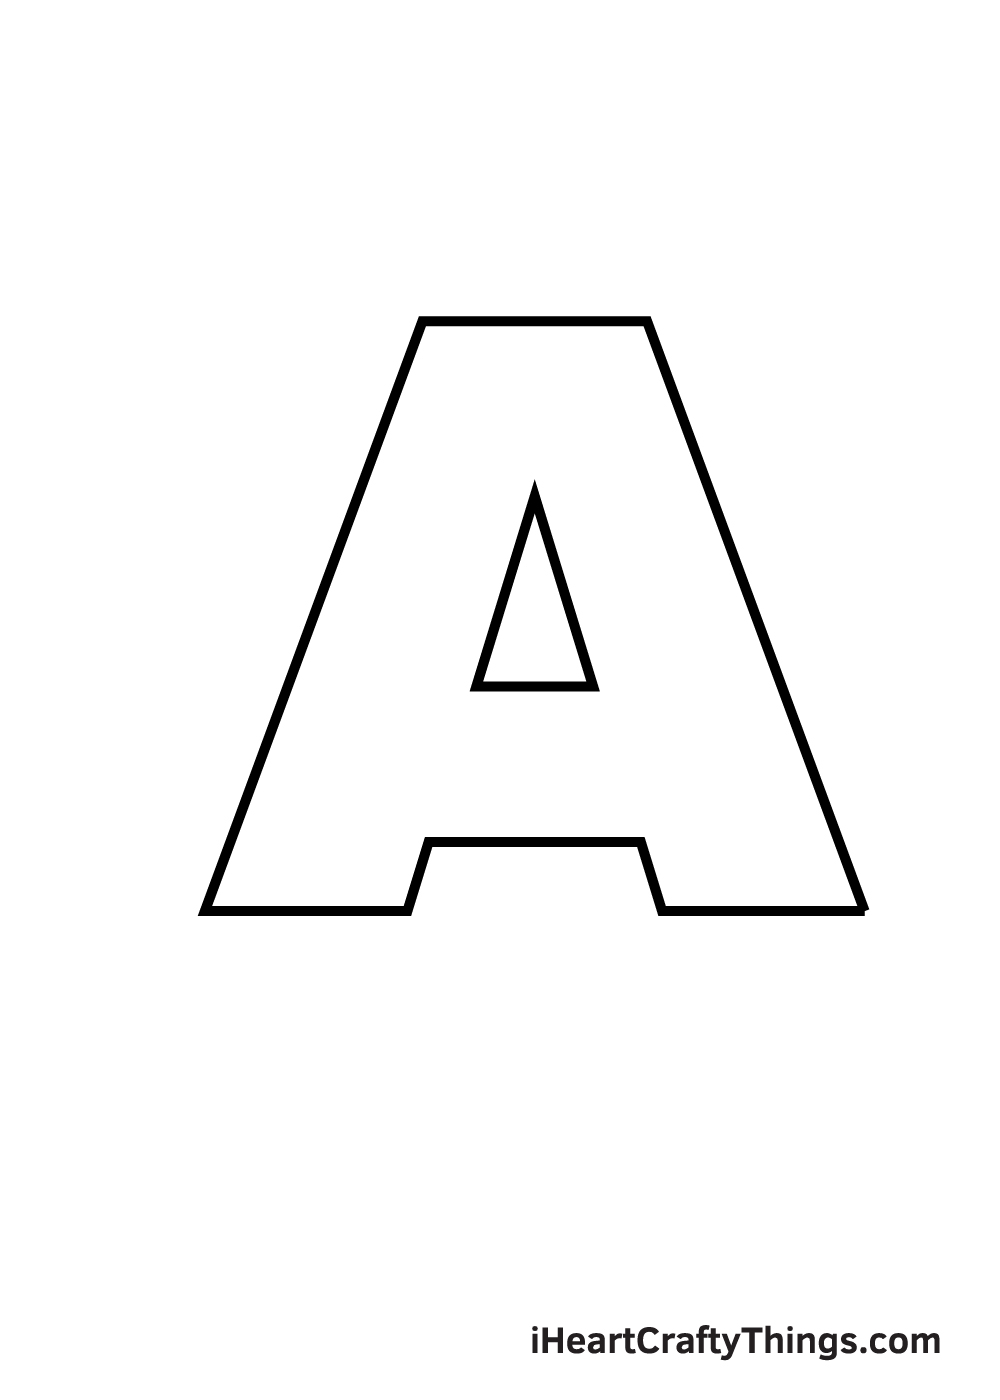 Learn How to Draw 3D Alphabet Letters by Valeria Goryna